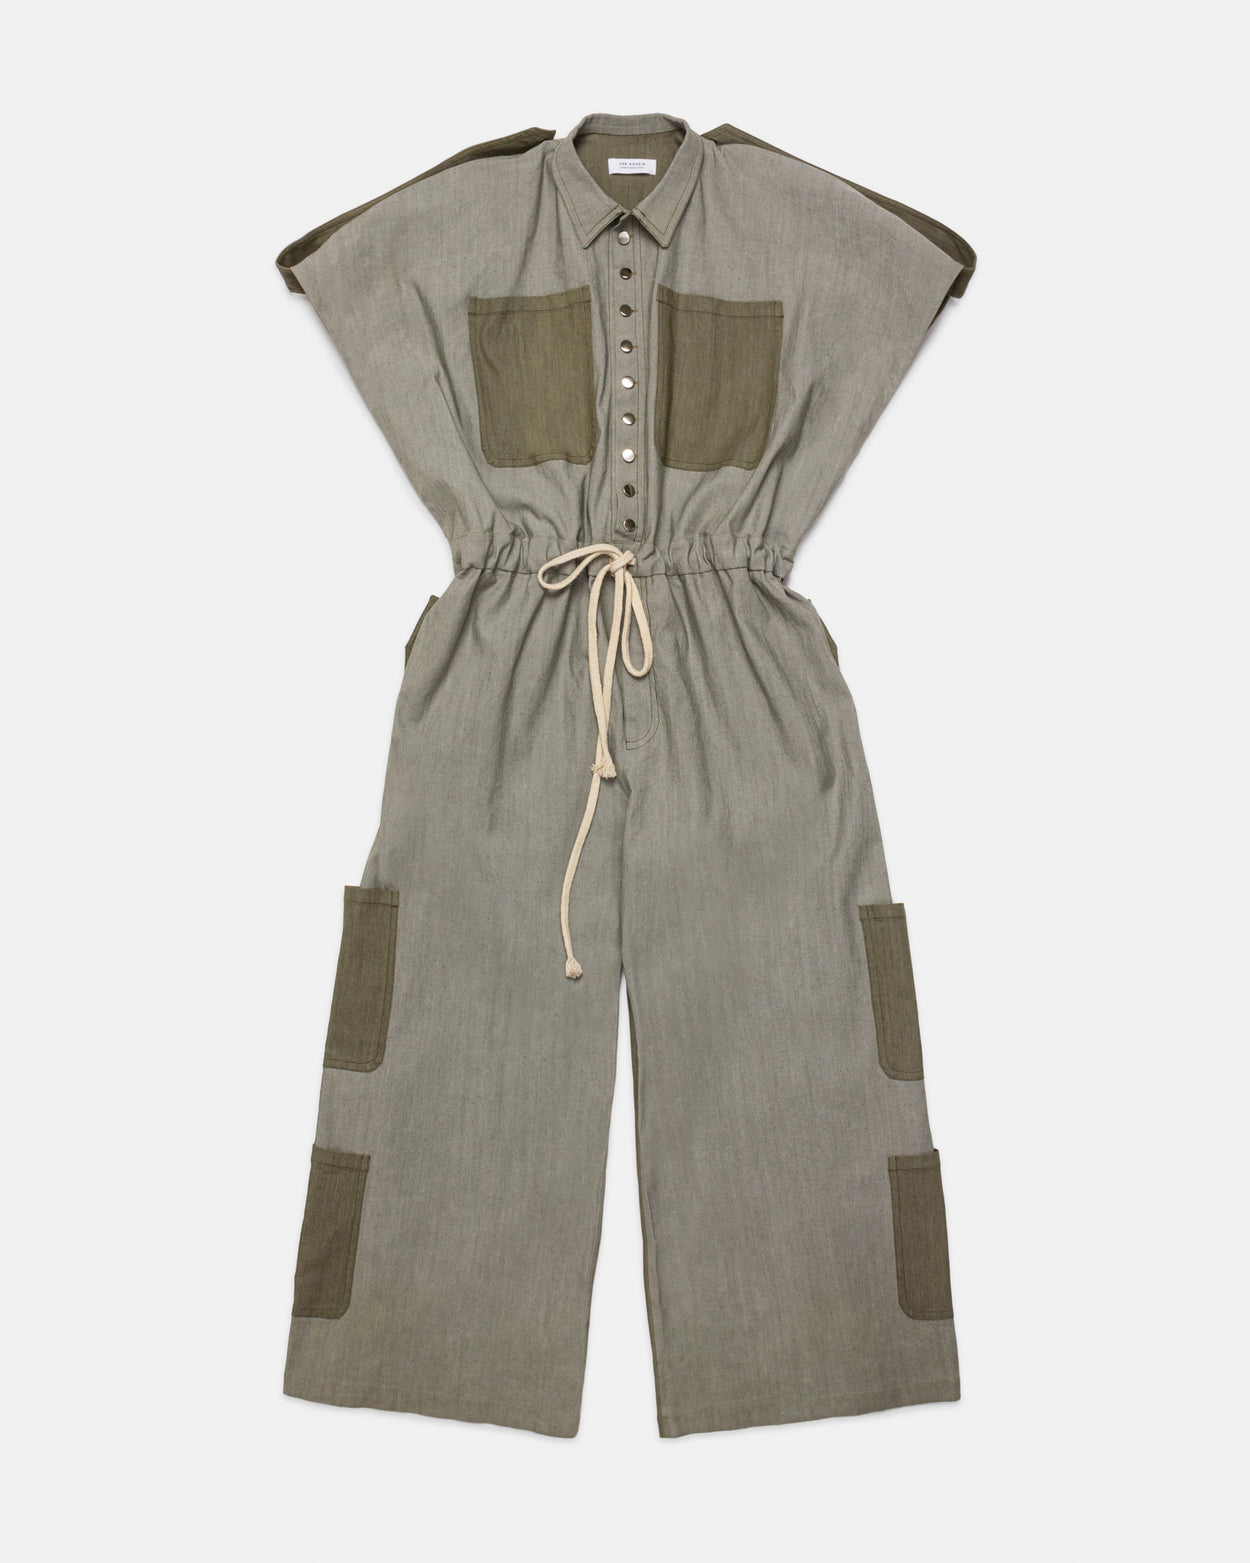 The Grey Matter Coverall